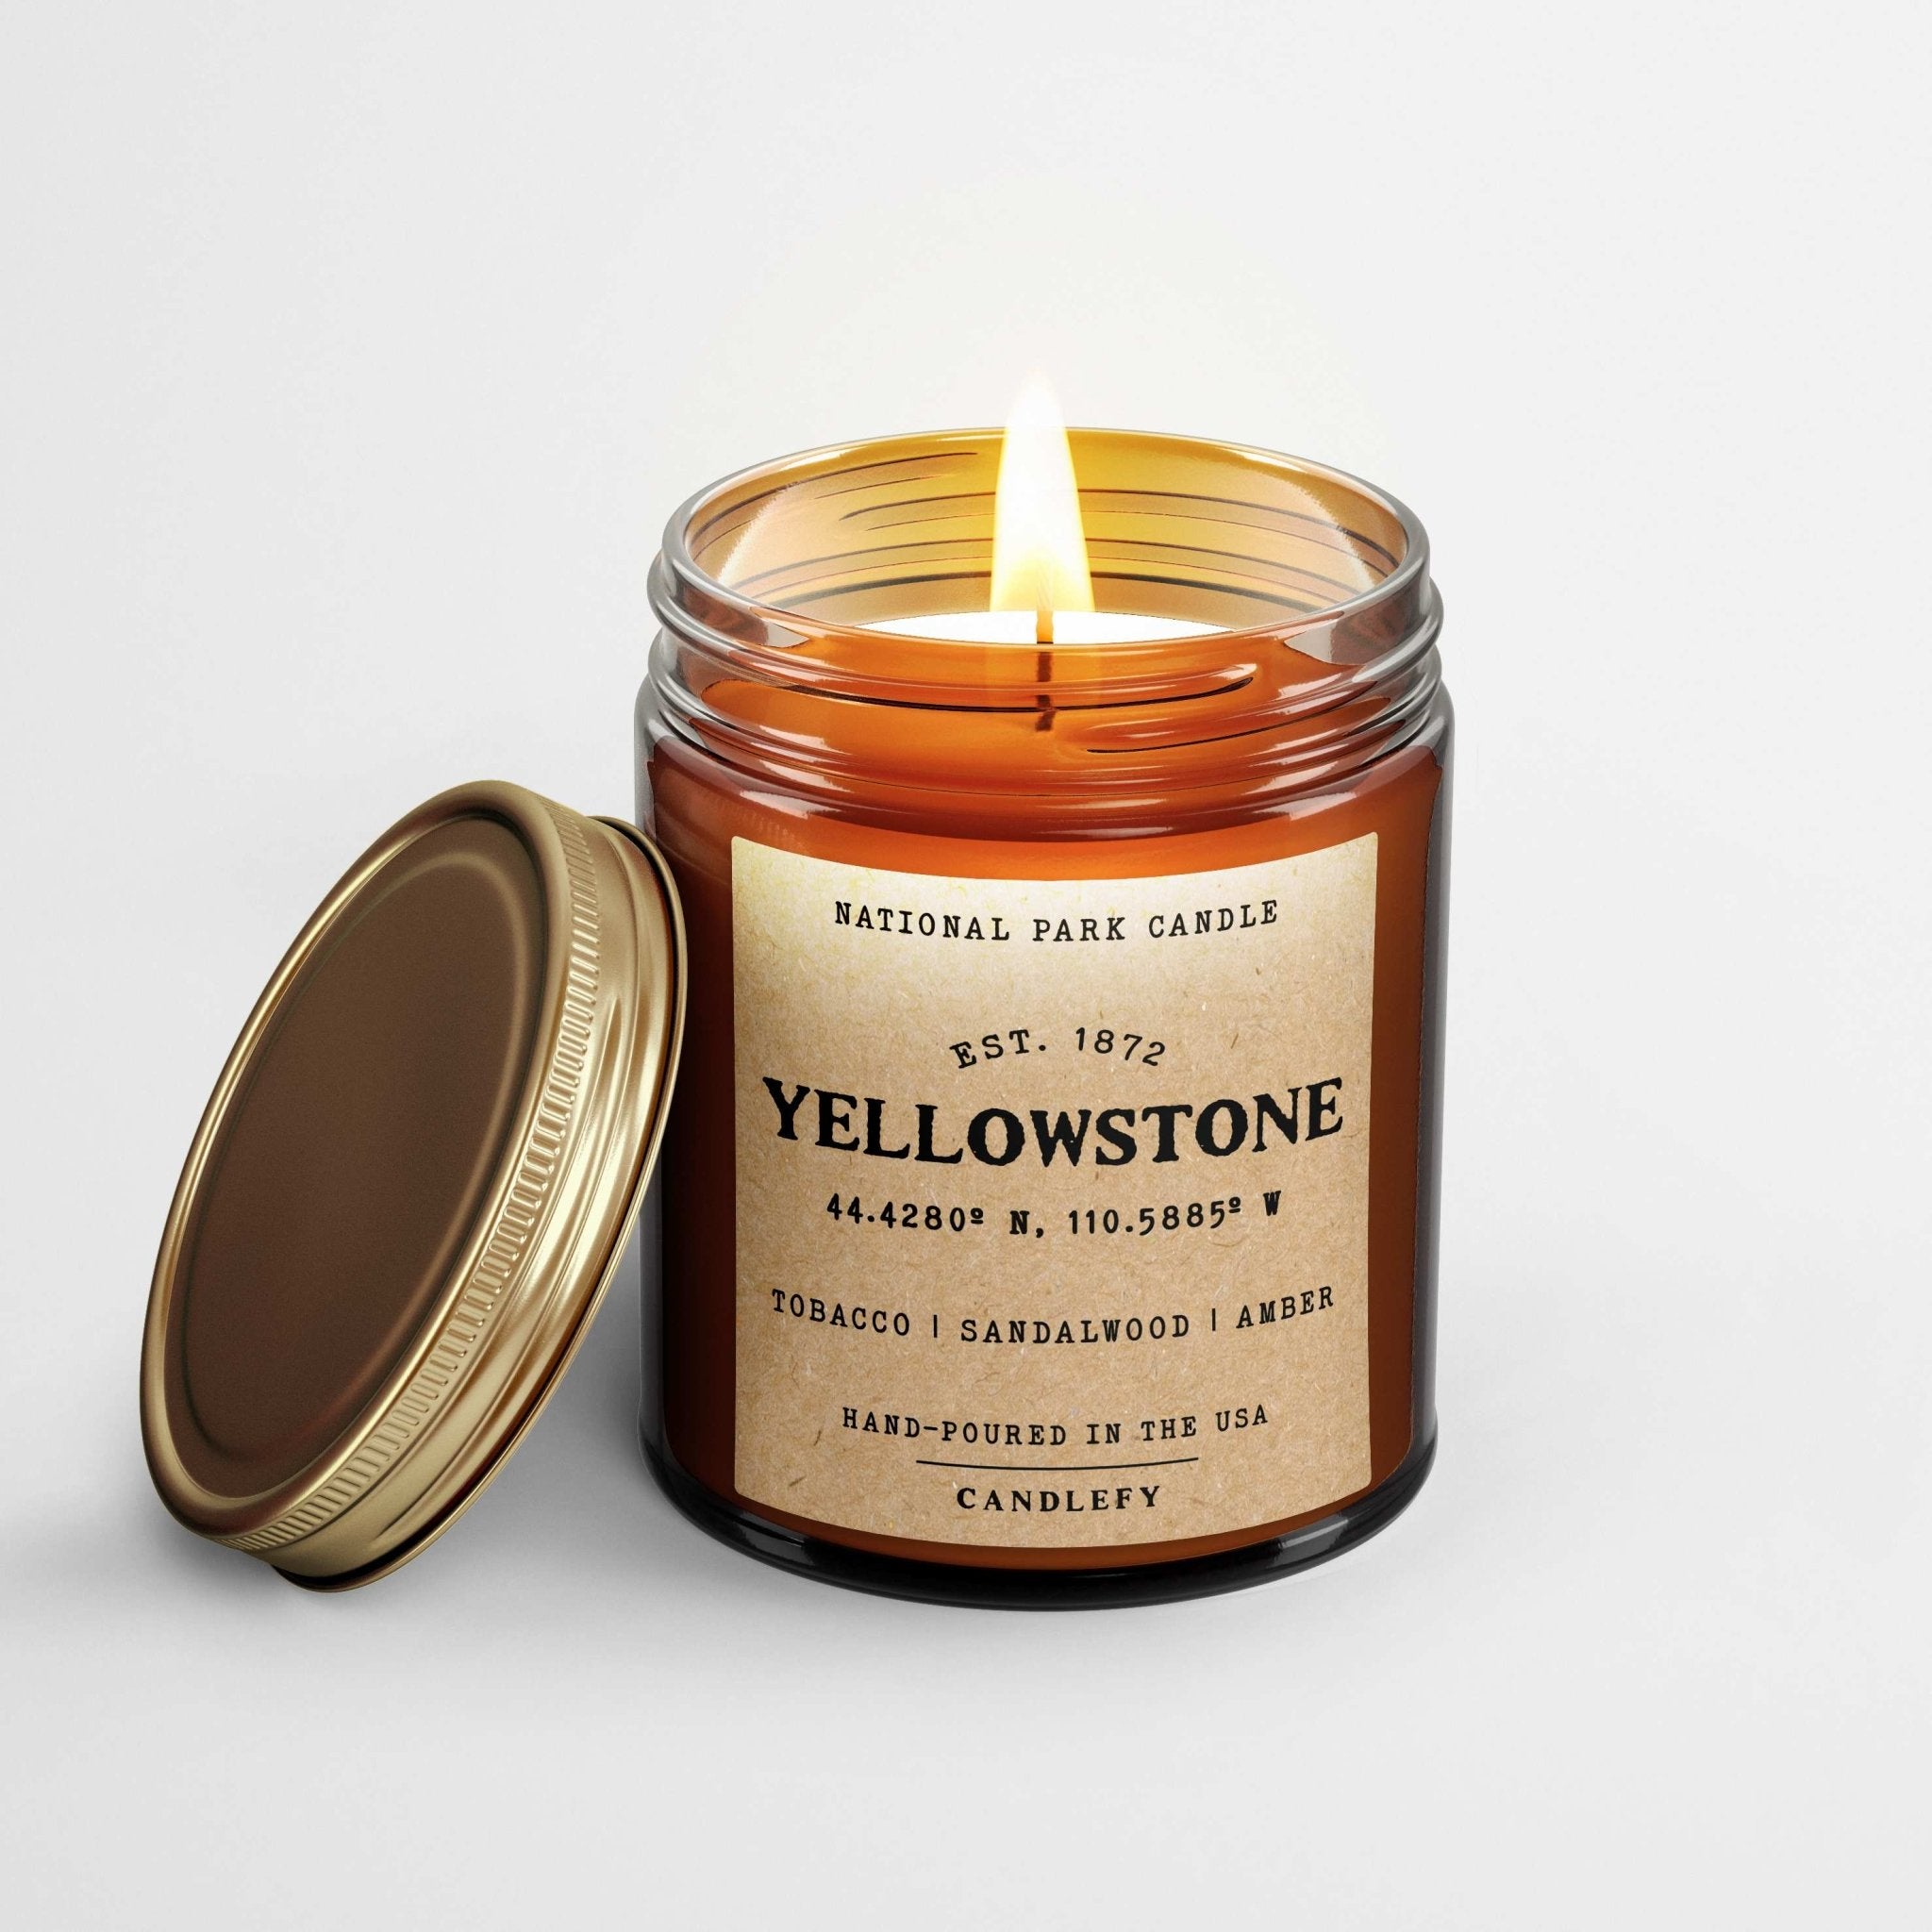 Yellowstone National Park Candle - Candlefy